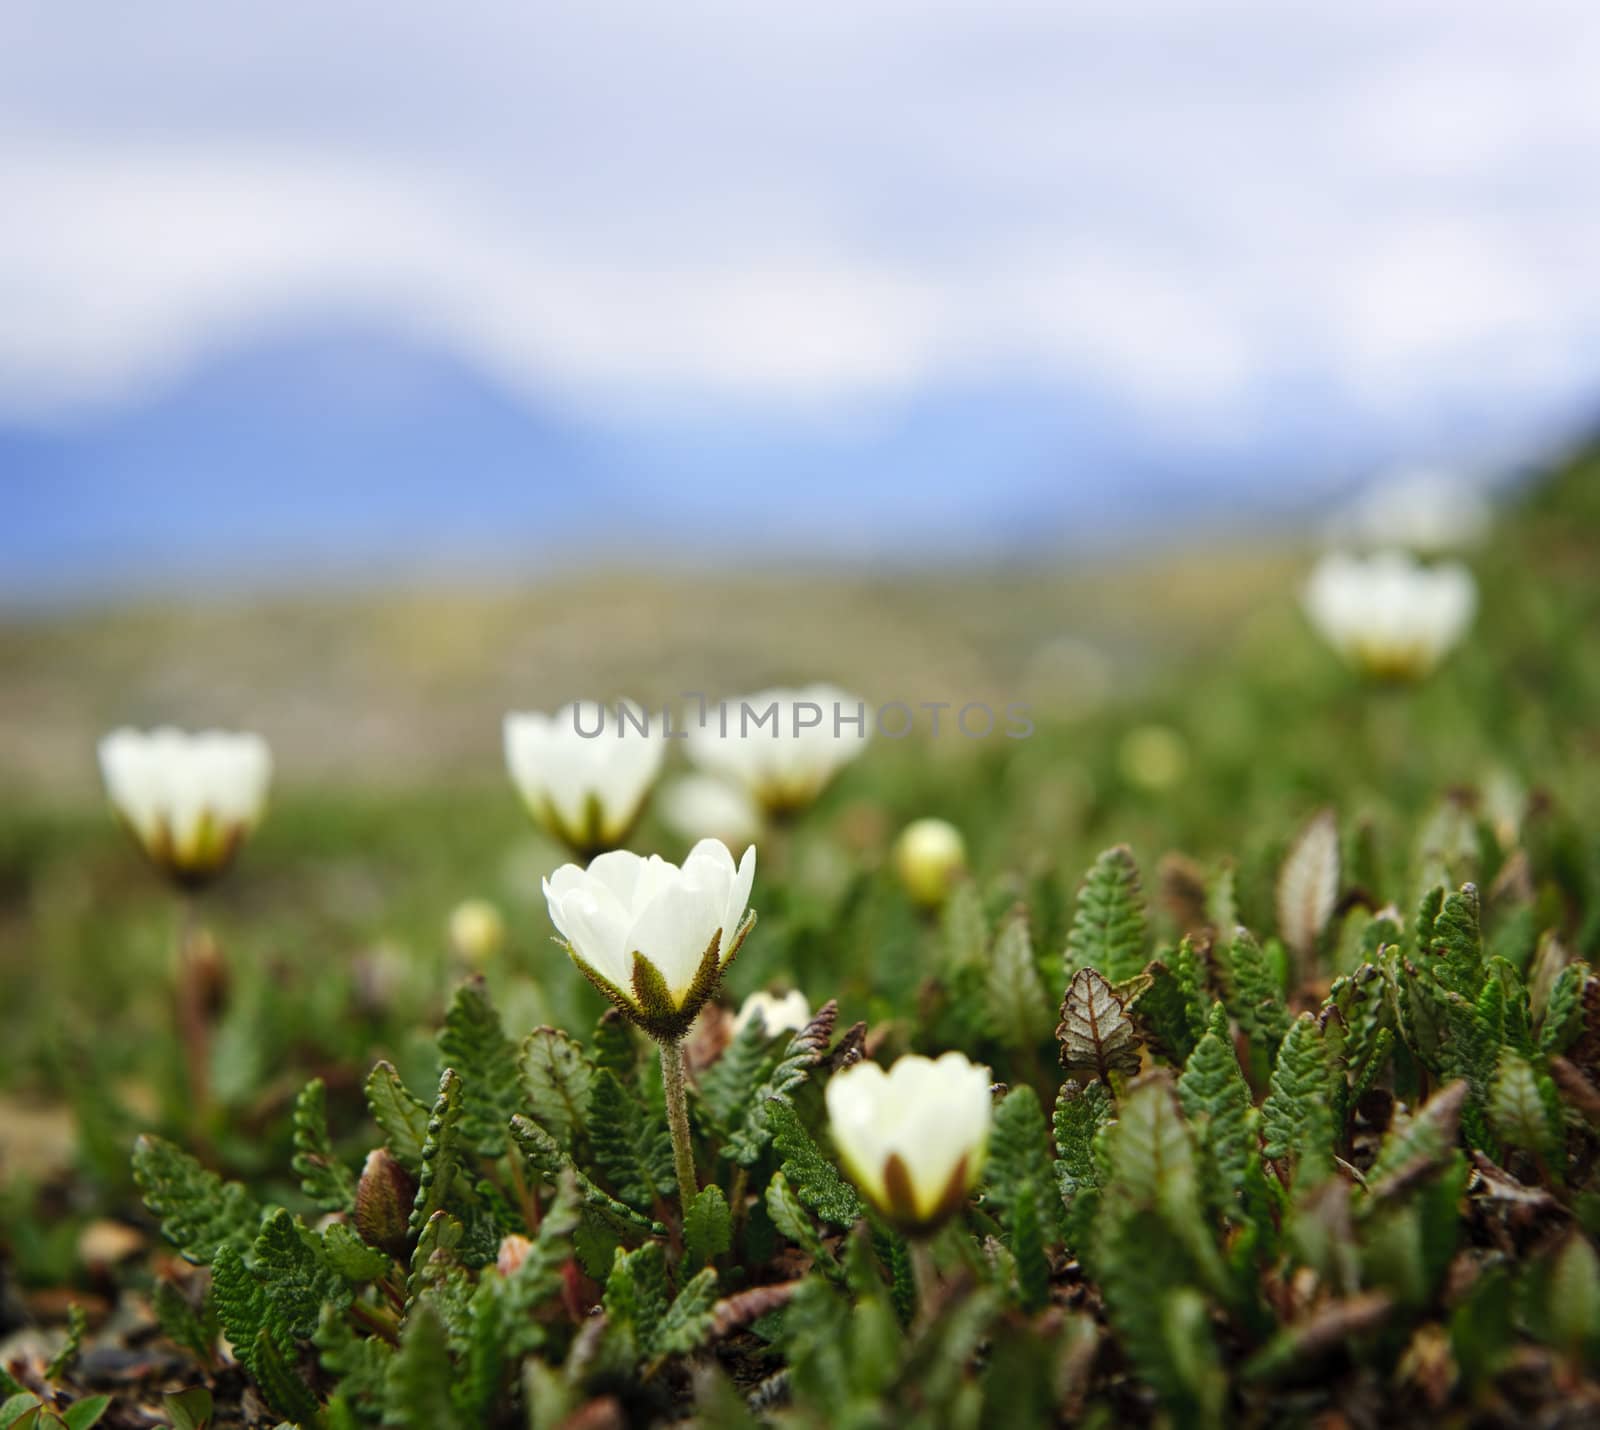 Alpine meadow with mountain avens flowers blooming in Jasper National Park, Canada